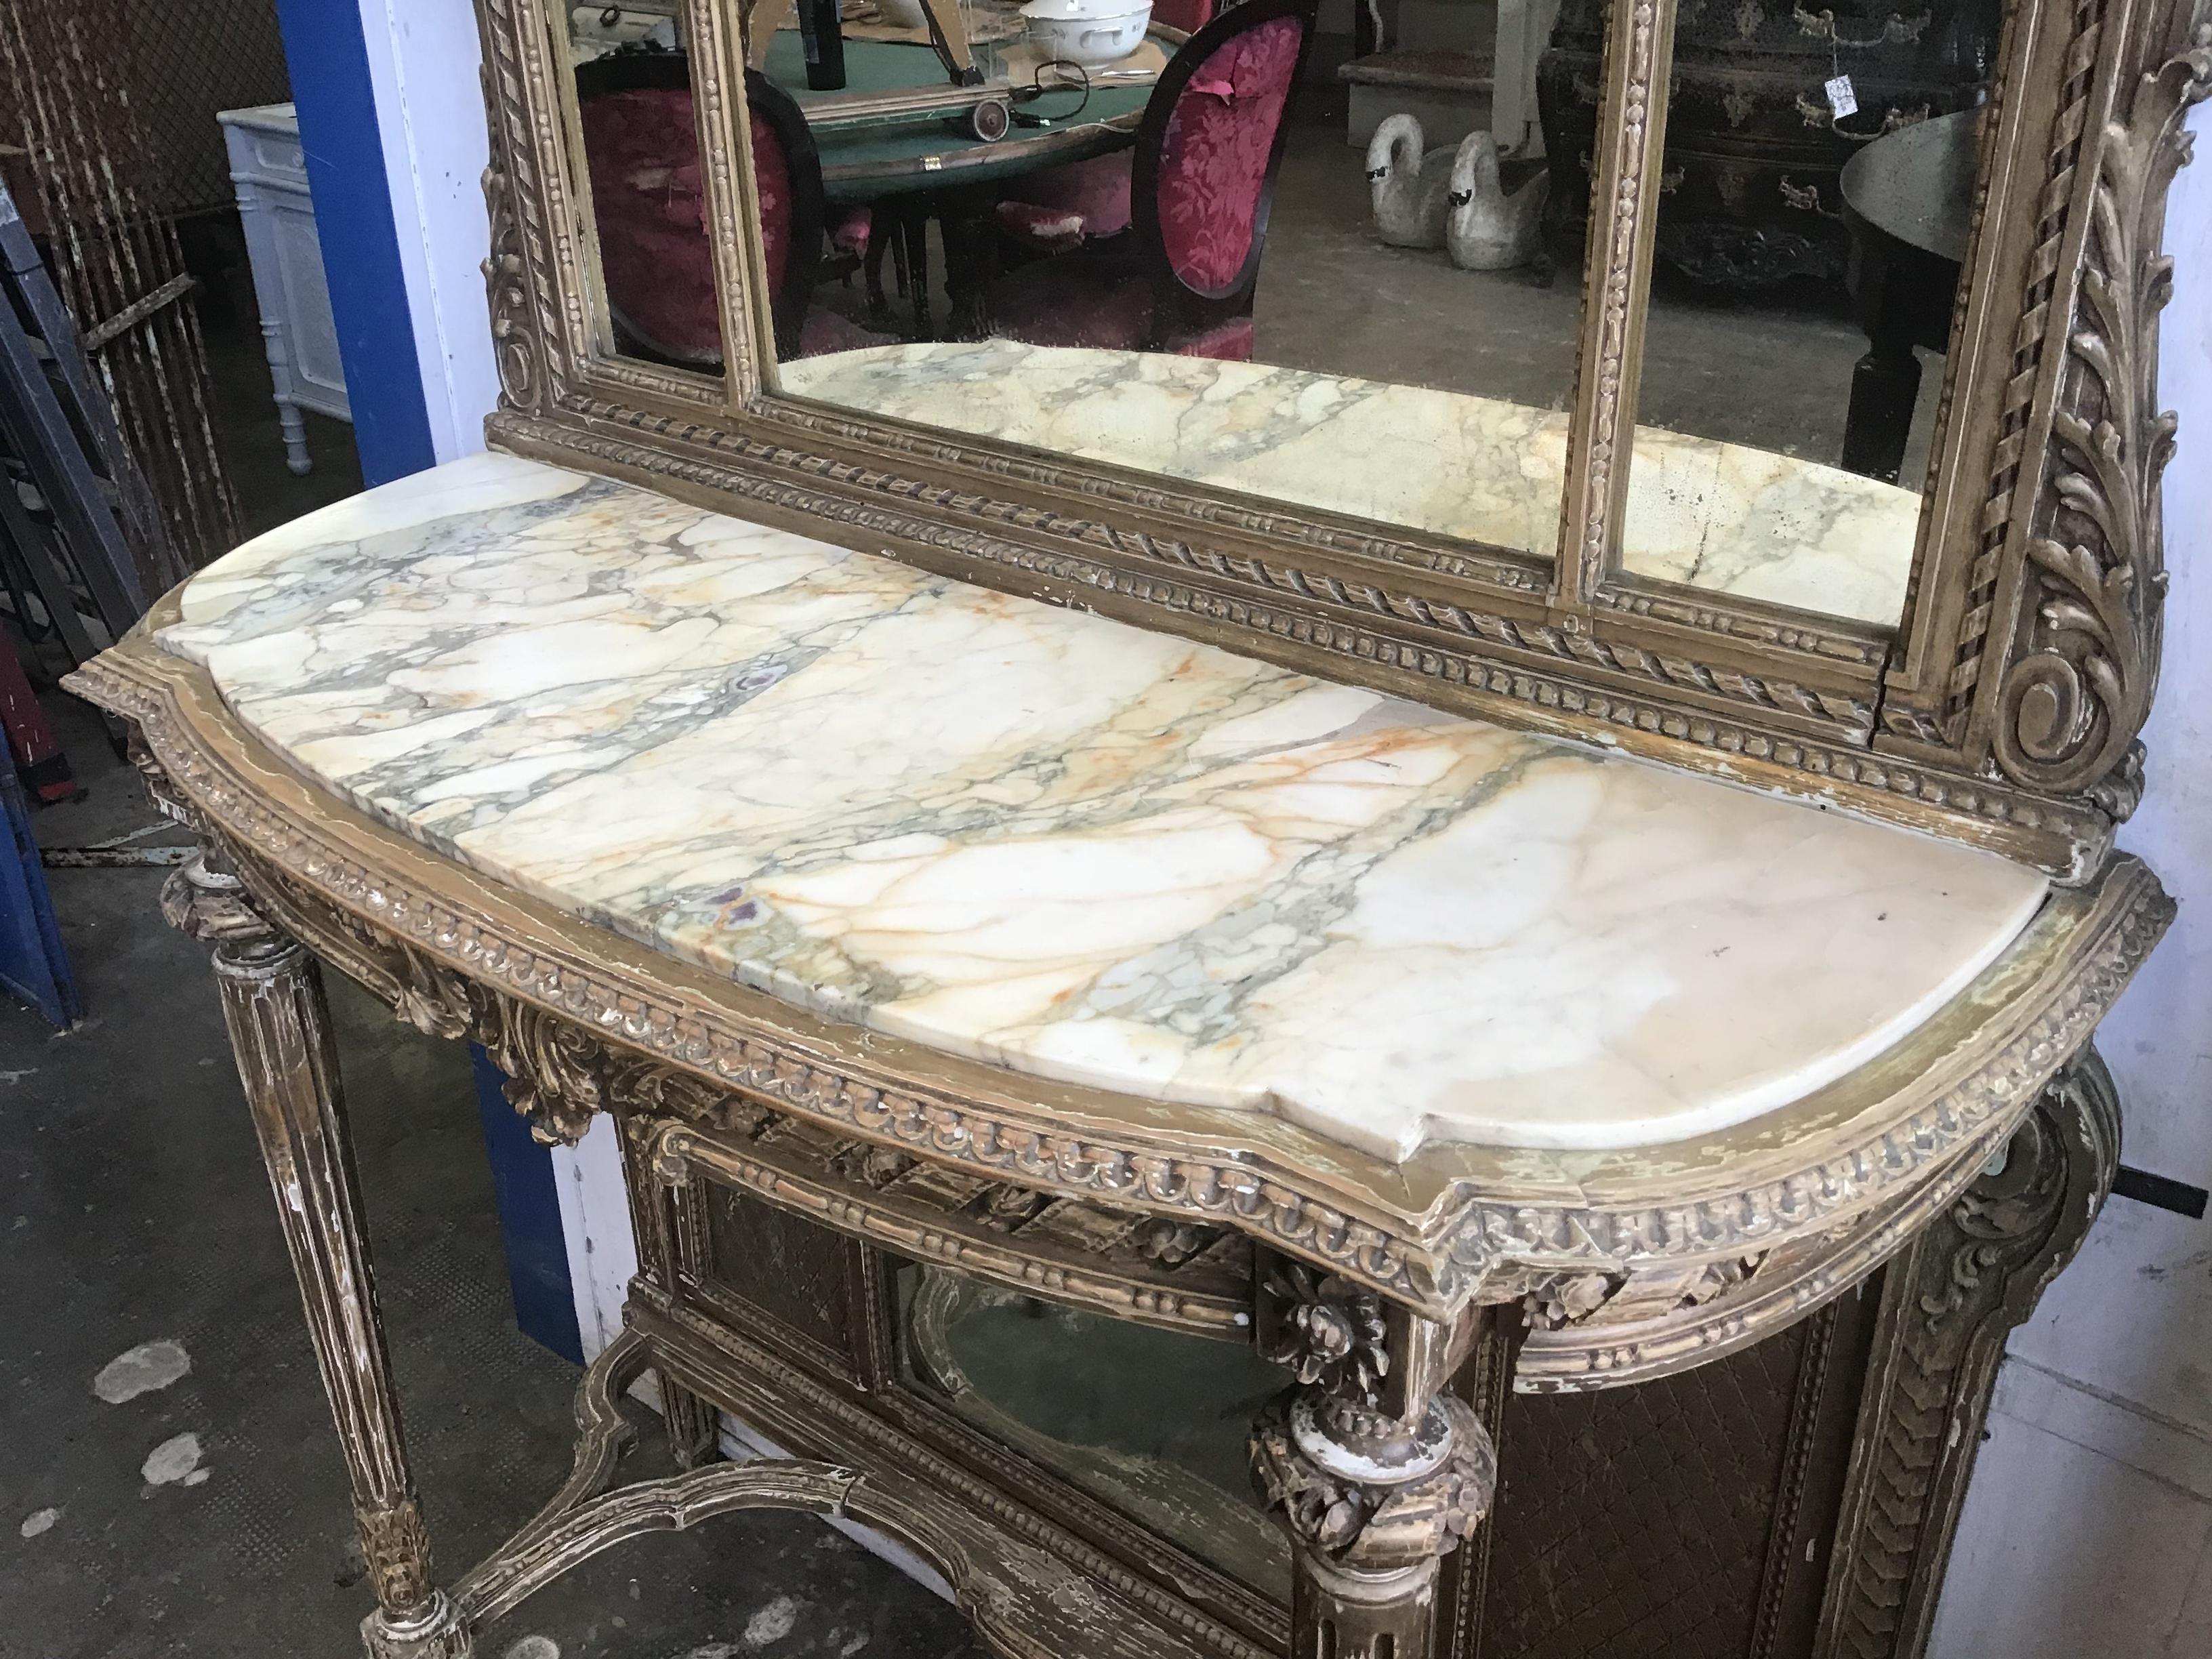 19th Century French Marble-Top Console with Giltwood Framed Mirror from 1890s (Spätes 19. Jahrhundert)